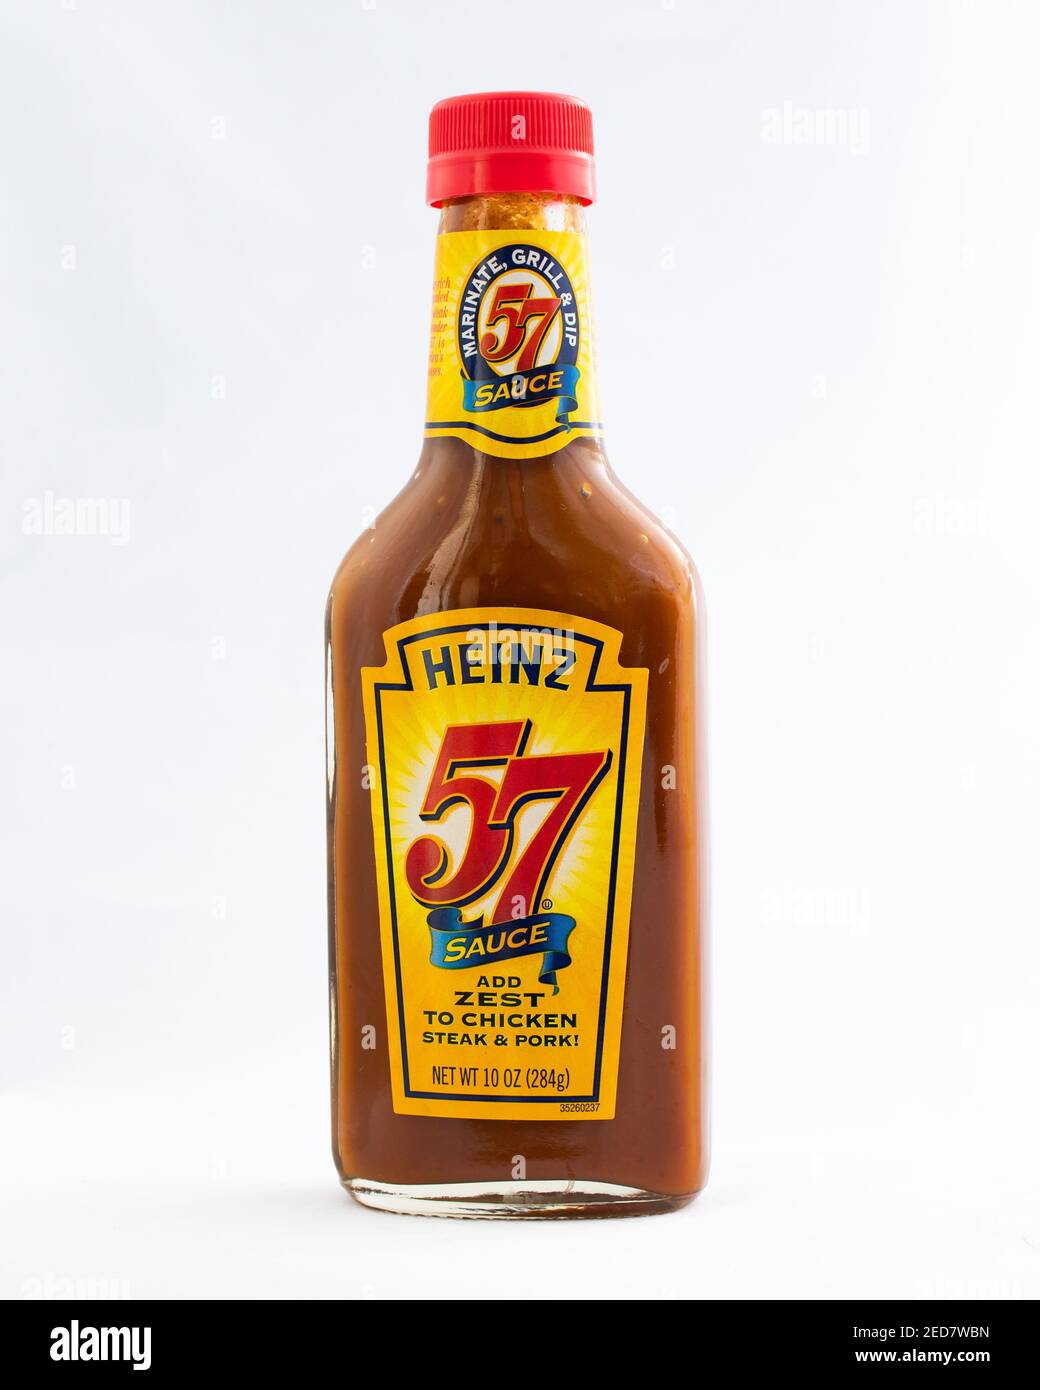 A bottle of Heinz 57 sauce for adding zest to chicken, steak and pork isolated on white. Stock Photo